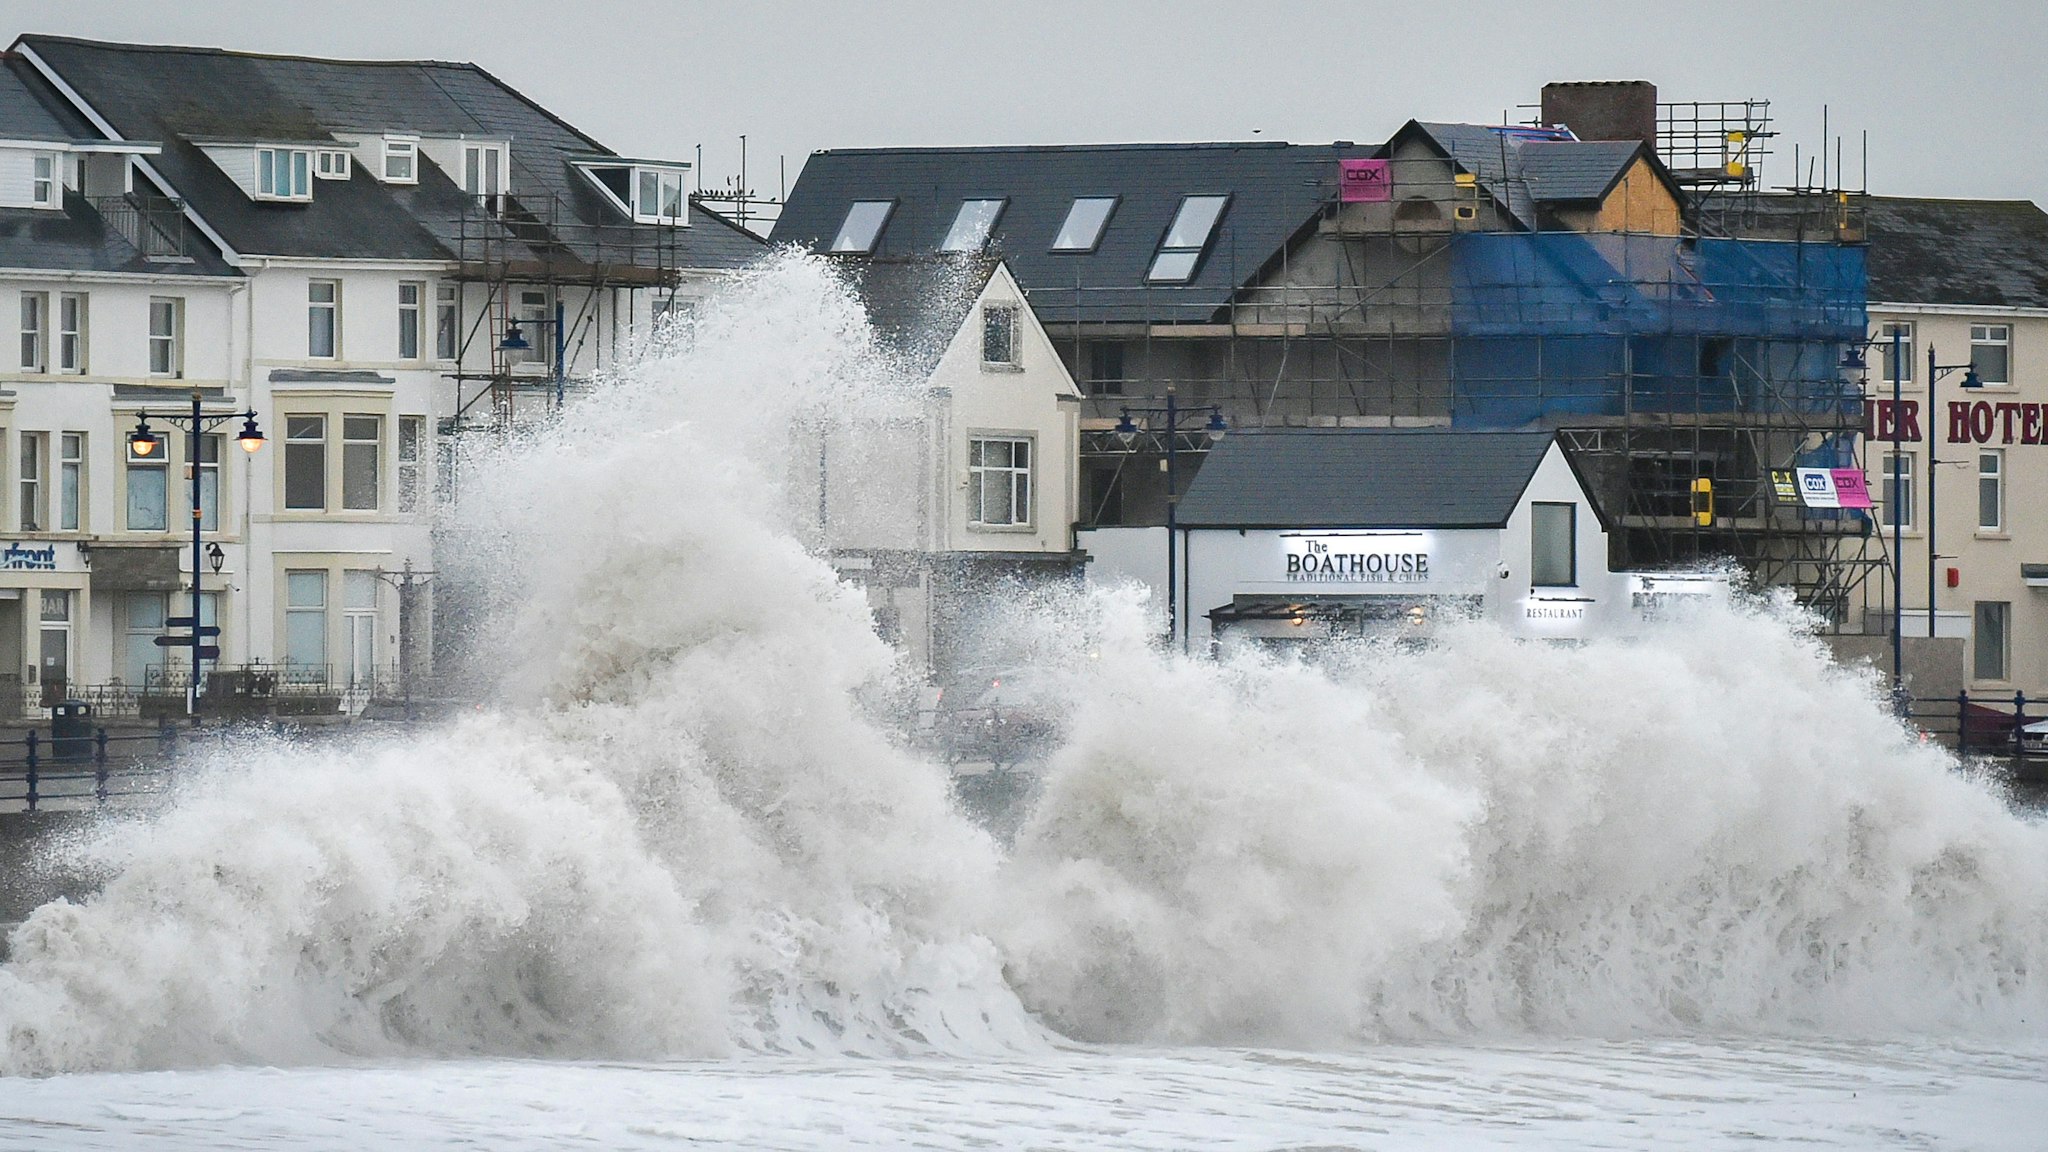 Huge waves hit the sea wall in Porthcawl, Wales, as gales of up to 80mph from Storm Brendan caused disruption around the UK.